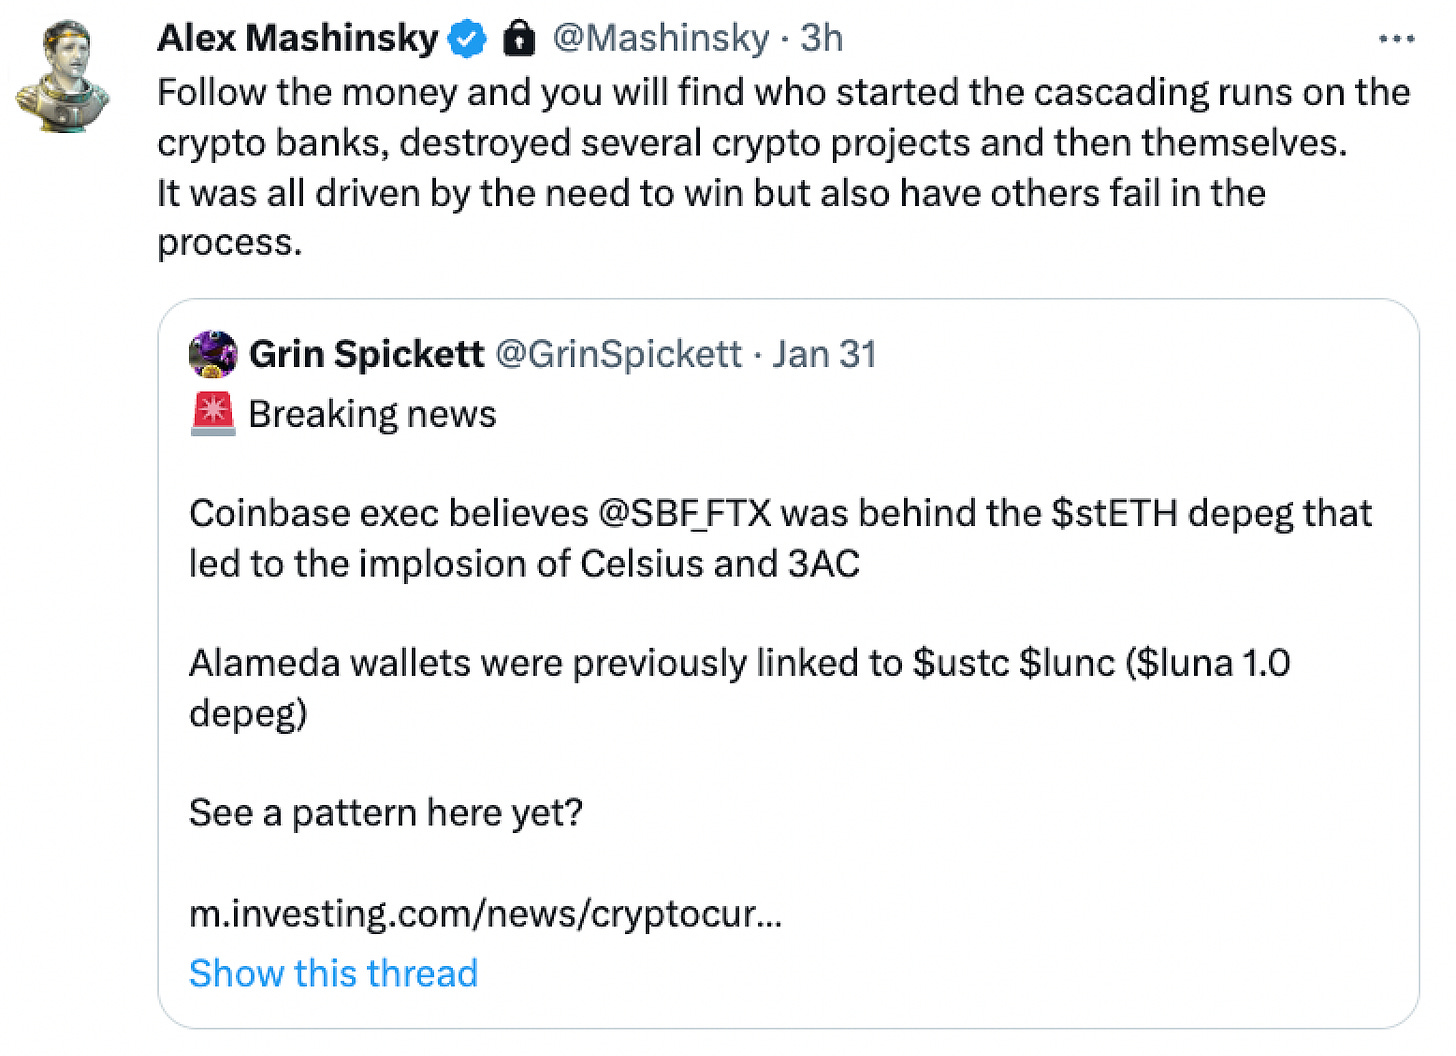 Tweet by Alex Mashinsky, quote-tweeting another user who wrote: "Breaking news Coinbase exec believes @SBF_FTX was behind the $stETH depeg that led to the implosion of Celsius and 3AC. Alameda wallets were previously linked to $ustc $lunc ($luna 1.0 depeg) See a pattern here yet?" Mashinsky writes: "Follow the money and you will find who started the cascading runs on the crypto banks, destroyed several crypto projects and then themselves. It was all driven by the need to win but also have others fail in the process."